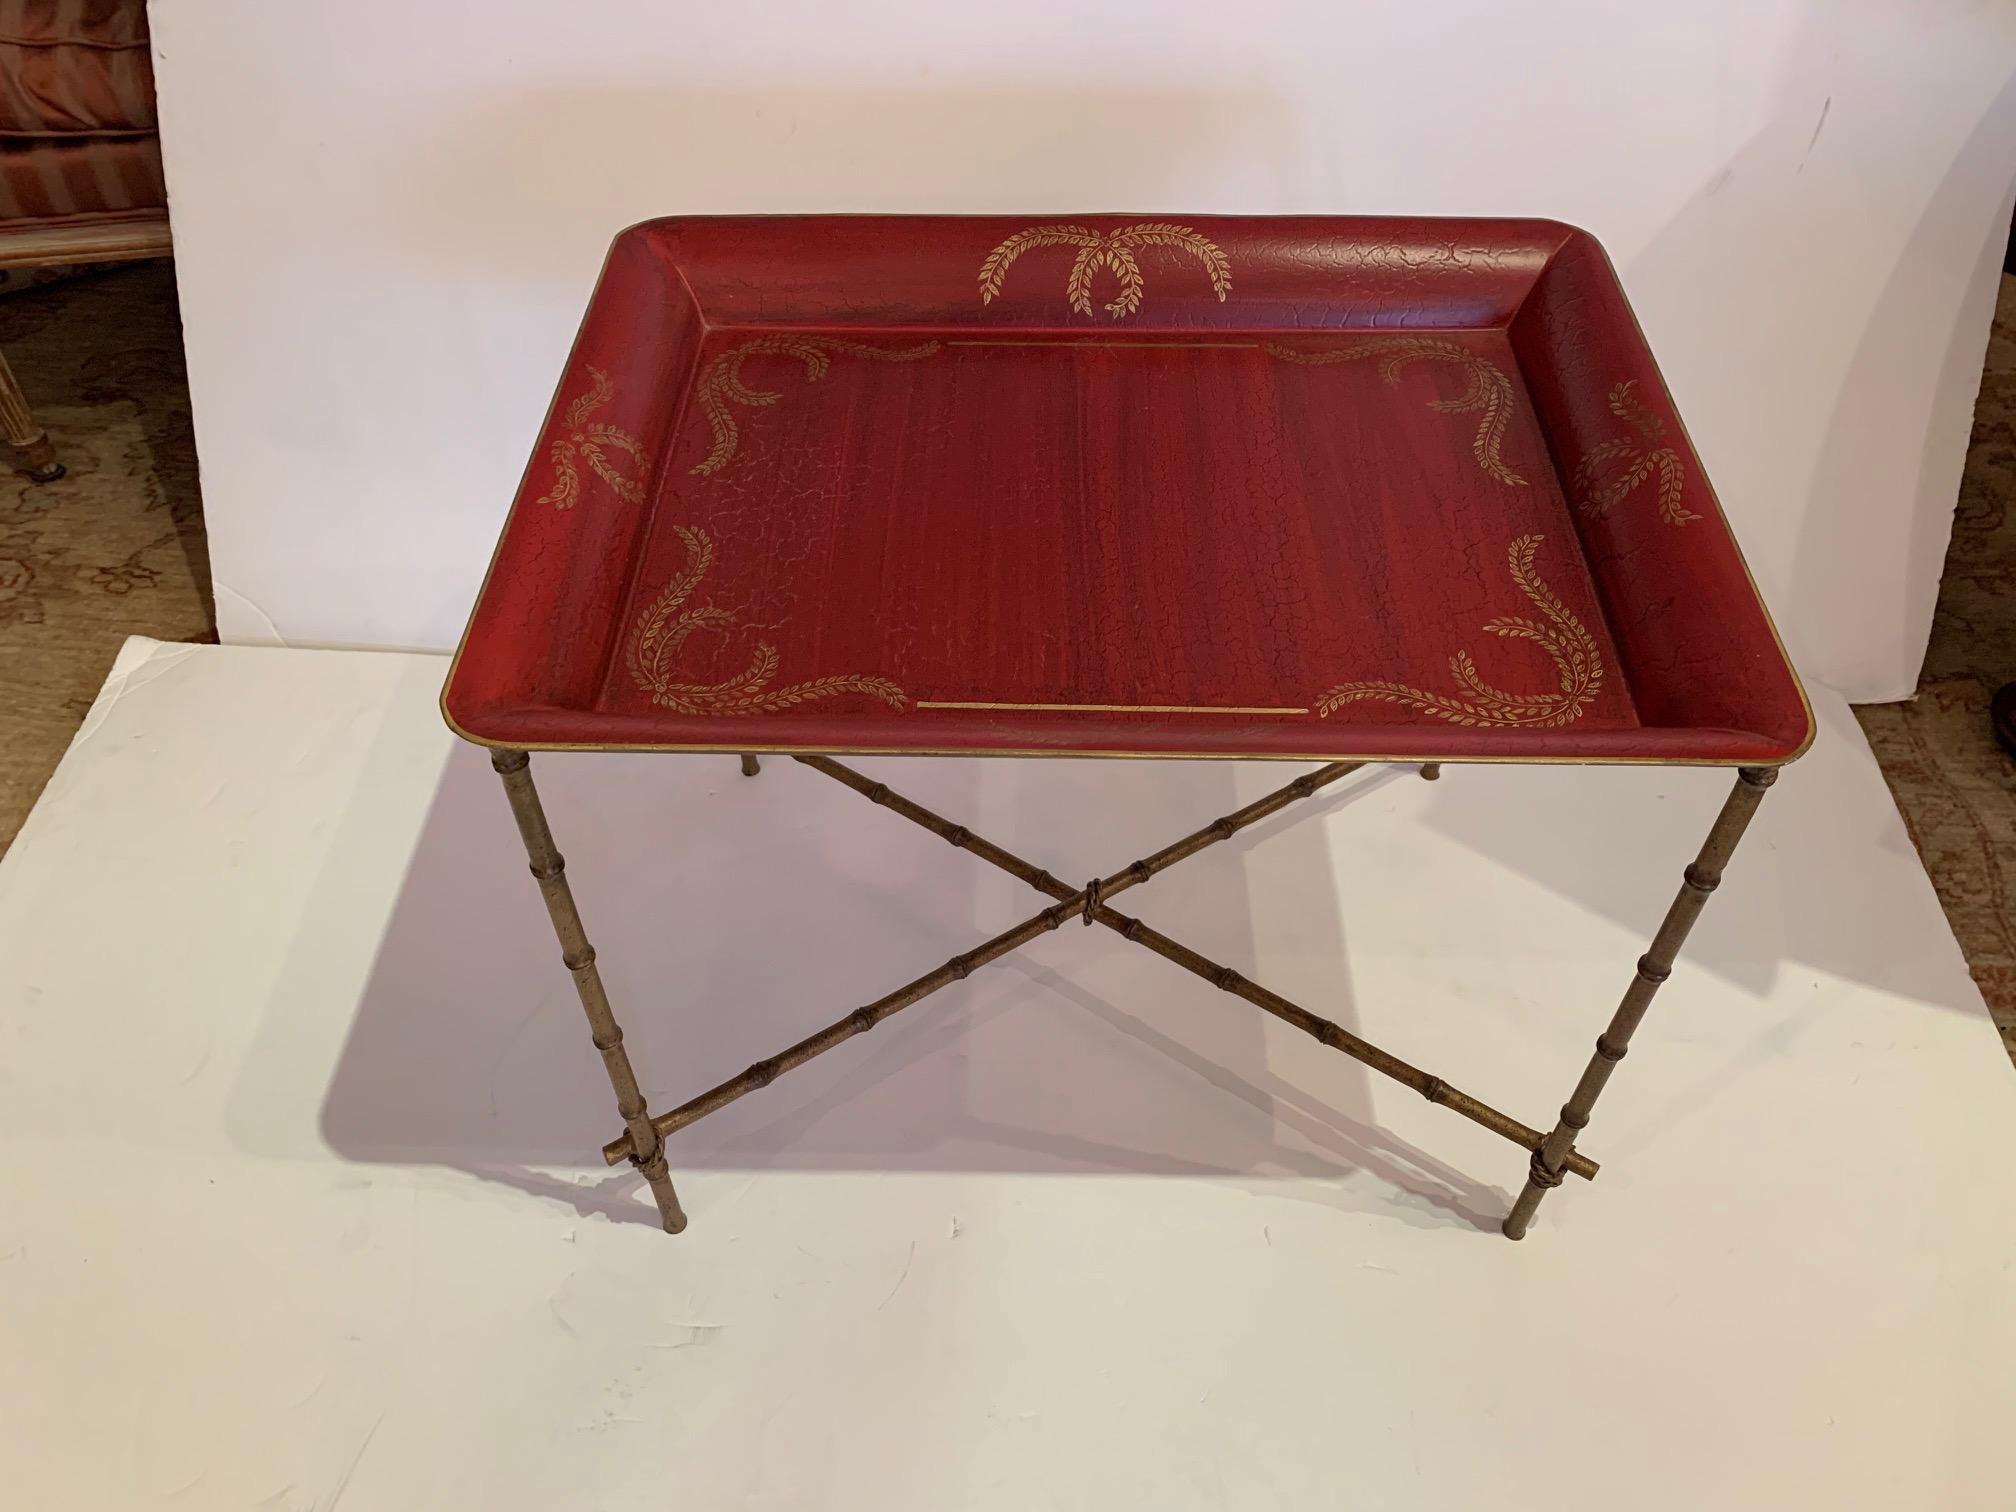 Stunning tray top end table with a rich pop of color having red top adorned with gold and elegant faux gilt bamboo base.